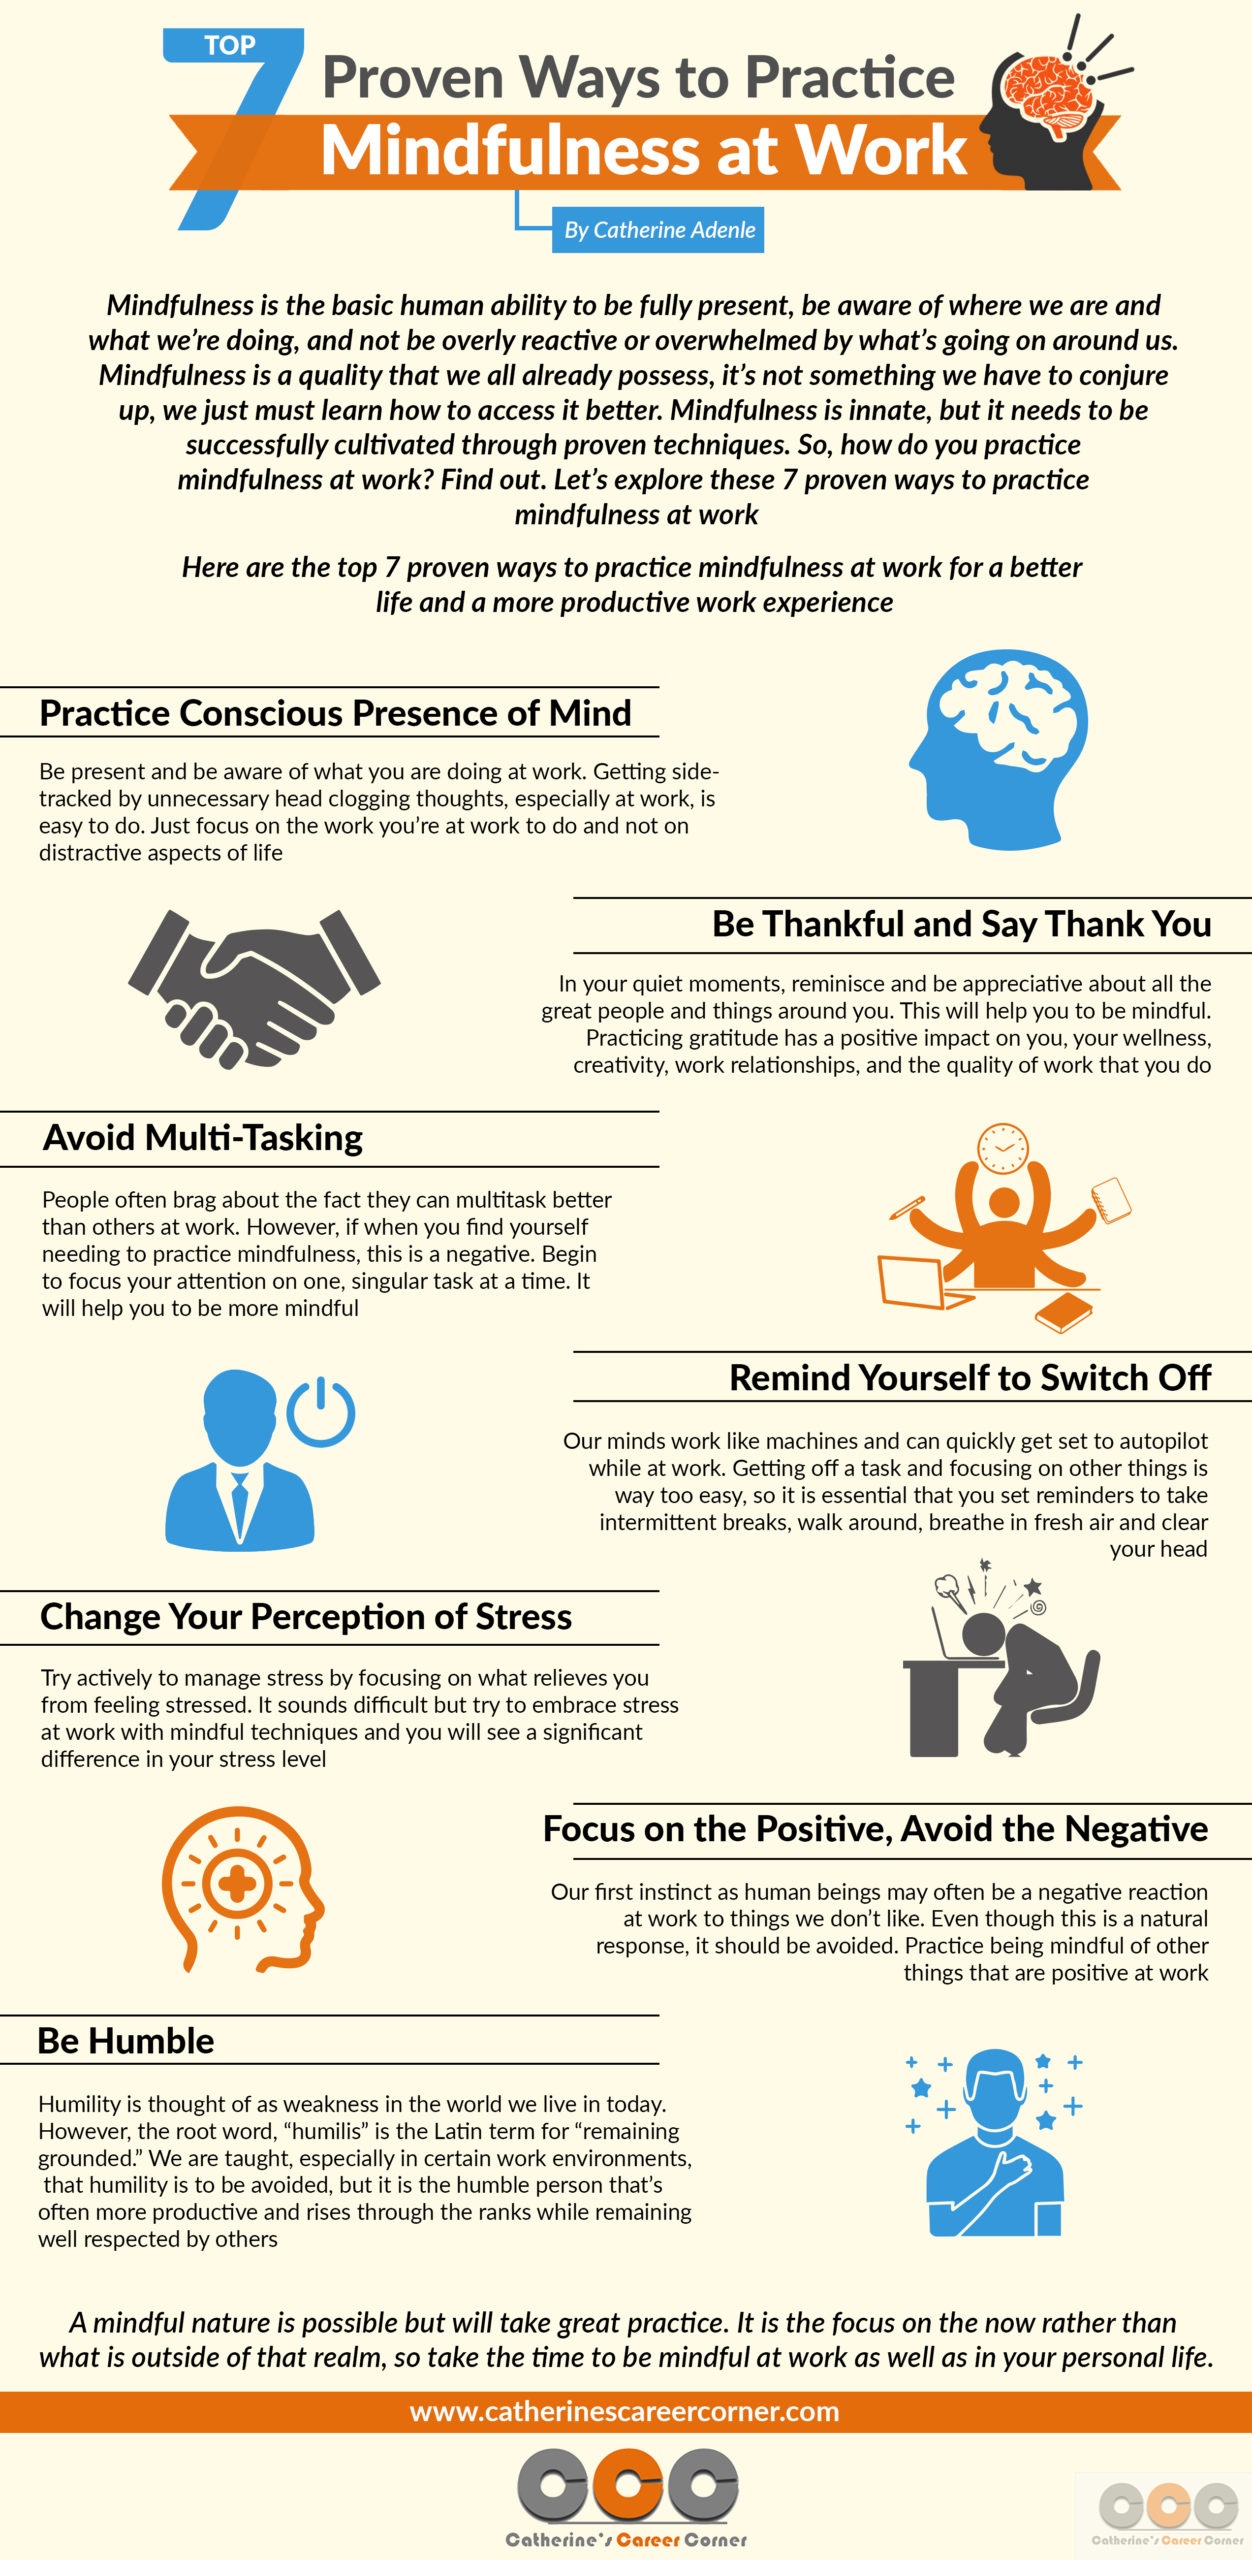 Top 7 Proven Ways to Practice Mindfulness at Work